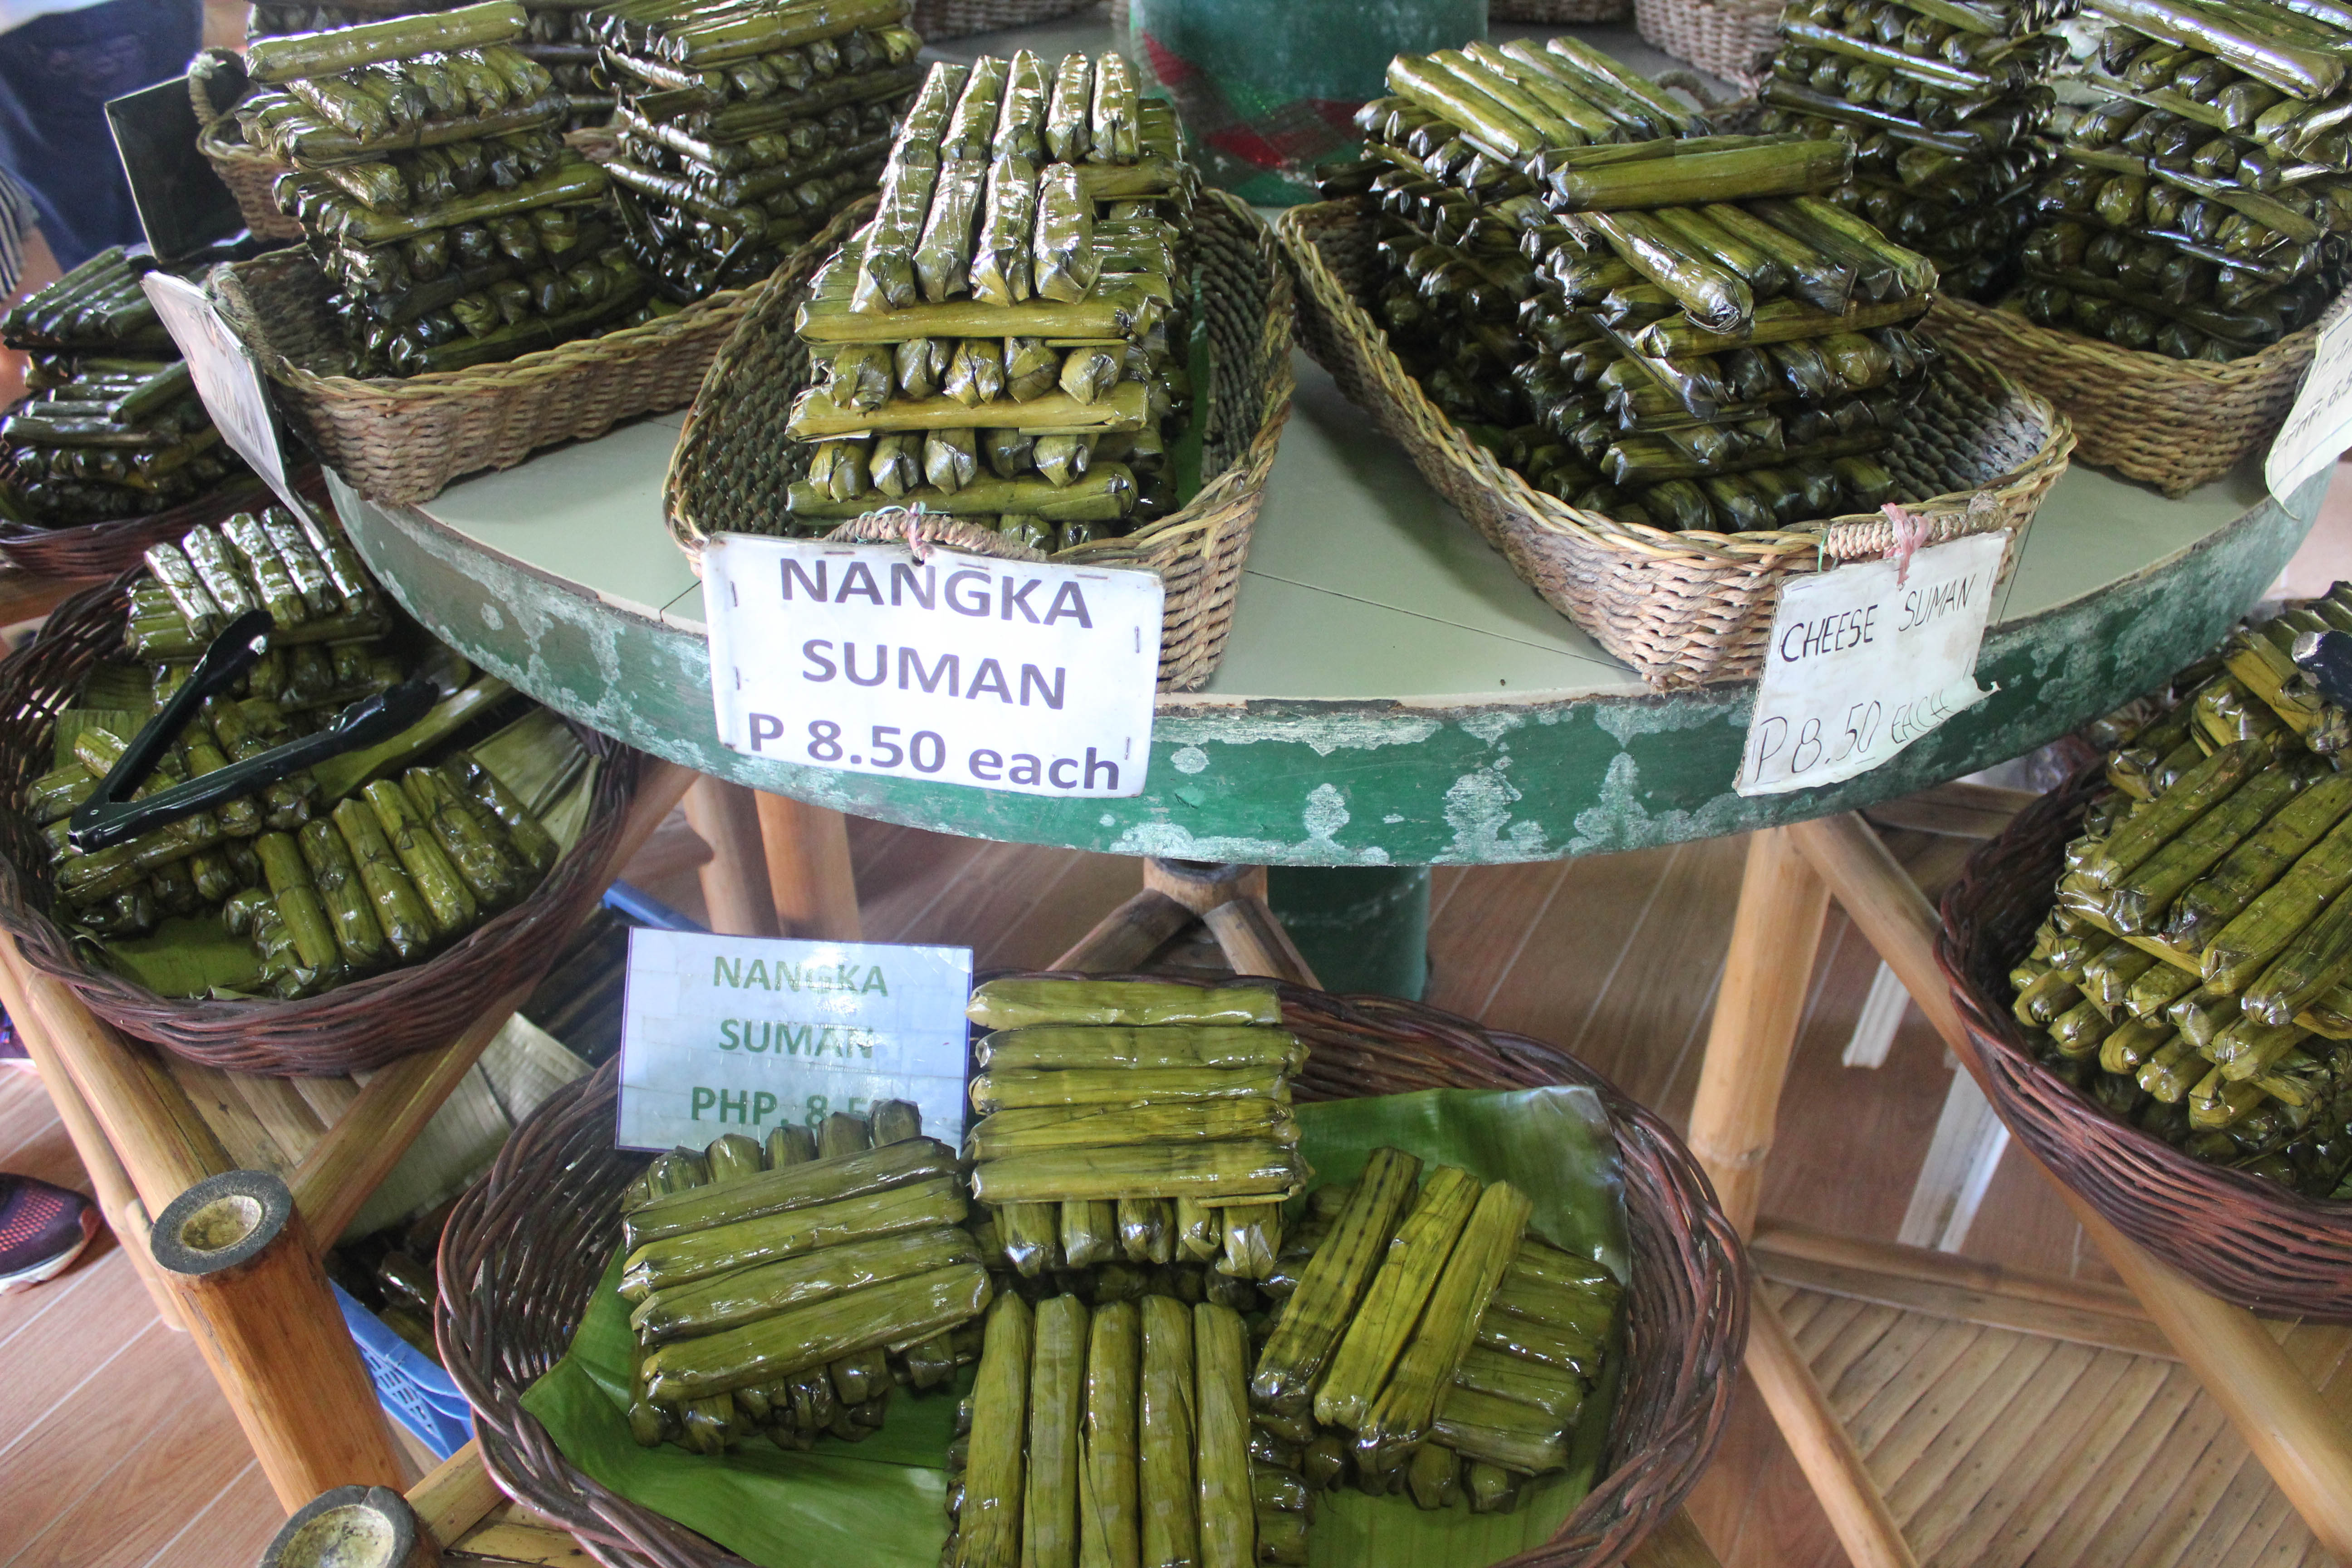 The Clarin House of Suman produces and sells thirteen (13) varieties of suman